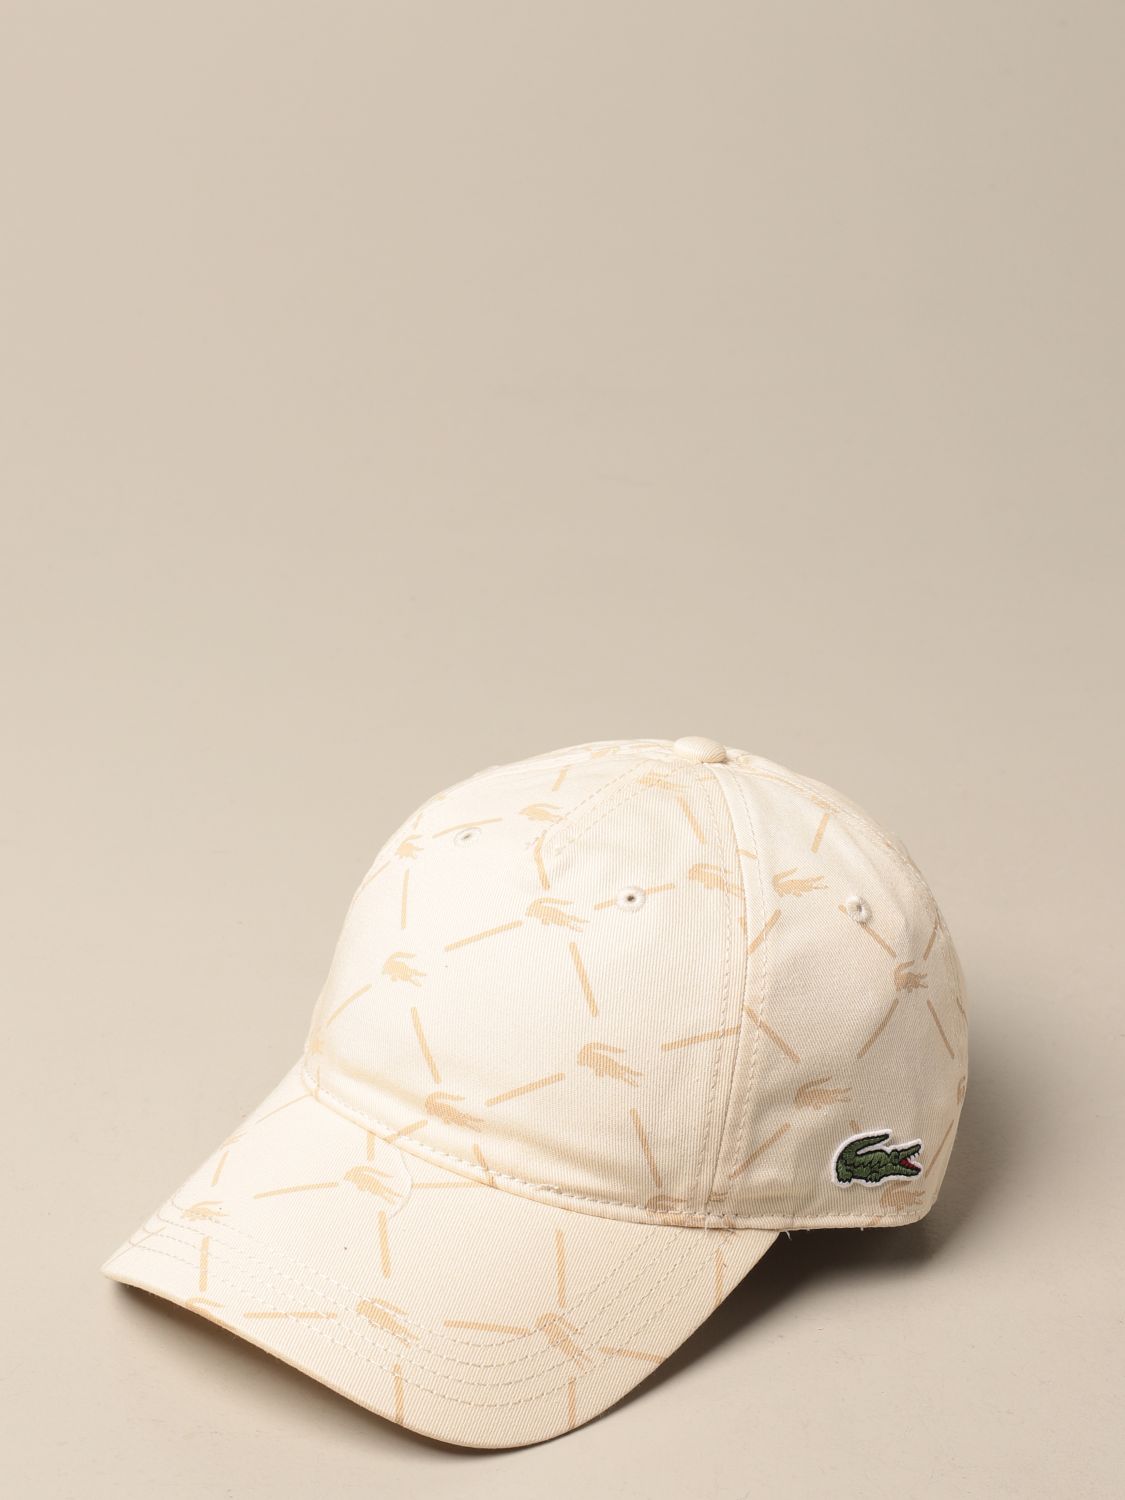 LACOSTE L!VE: for man - Yellow Cream Lacoste hat RK9008 online GIGLIO.COM